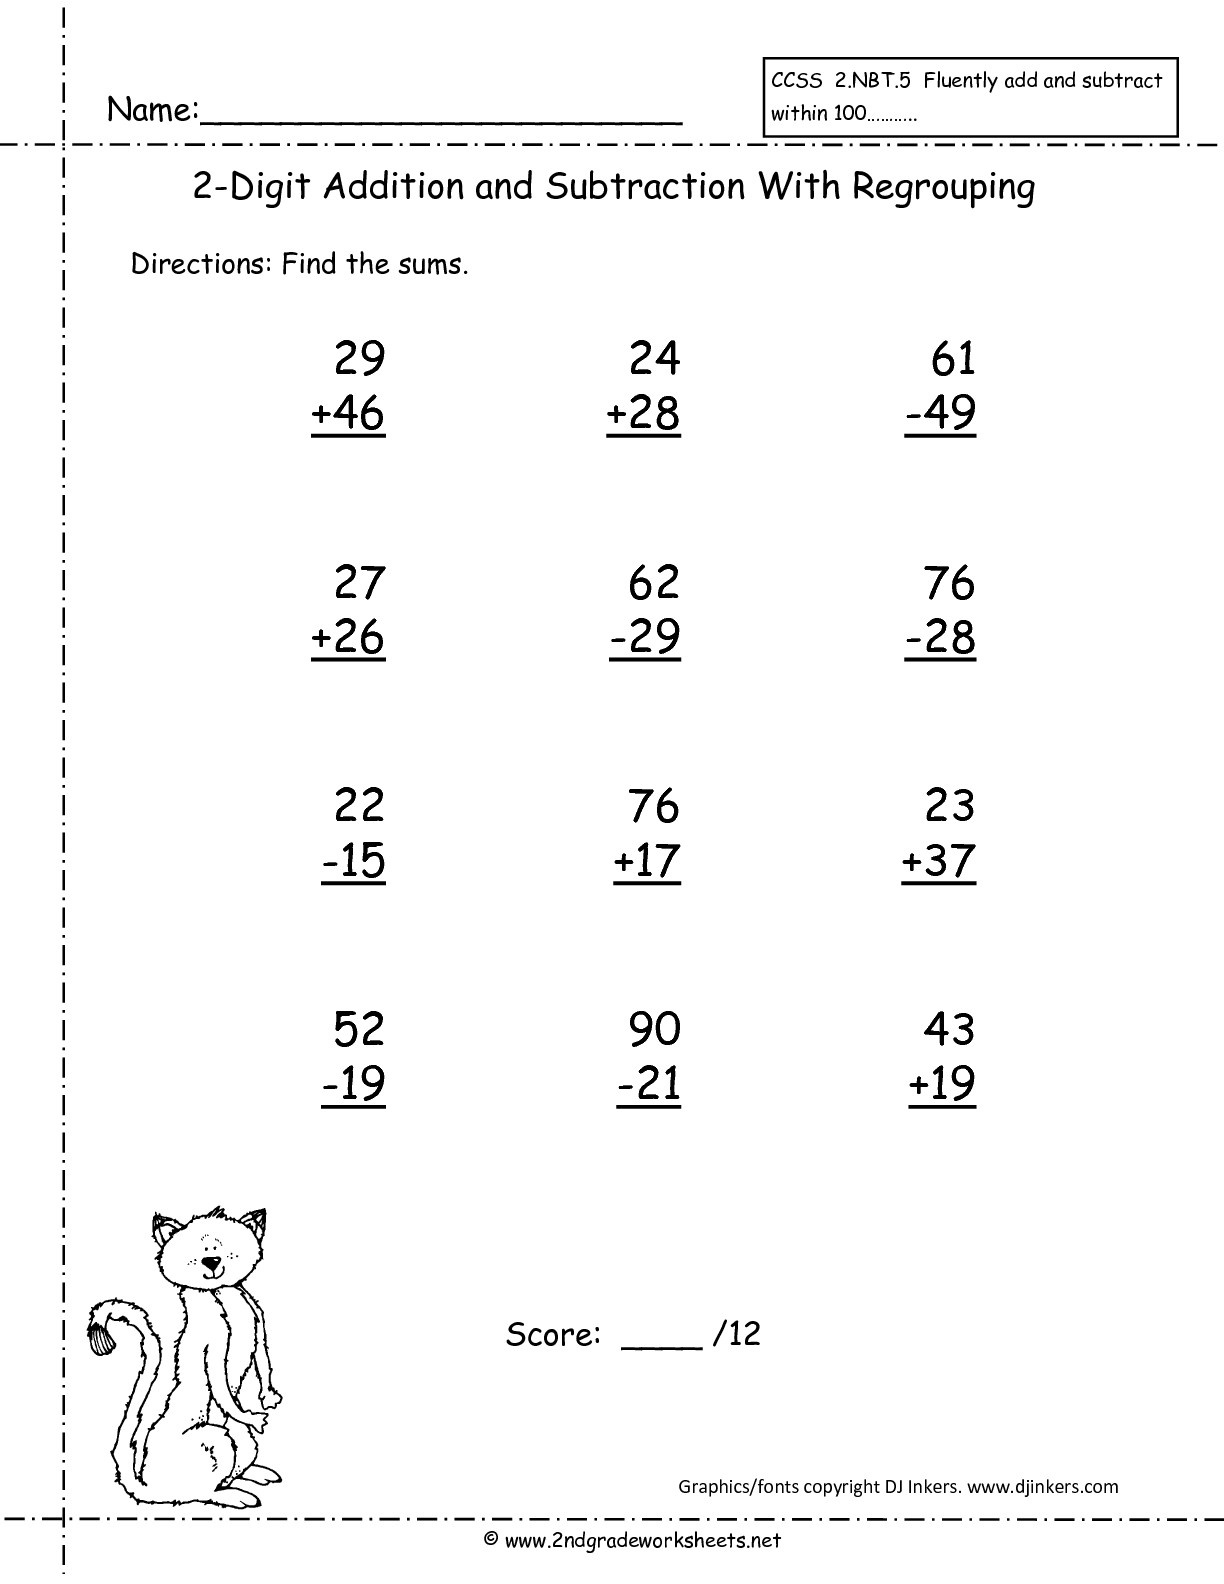 Two Digit Addition And Subtraction Worksheets From The Teacher&amp;#039;s Guide - Free Printable Mixed Addition And Subtraction Worksheets